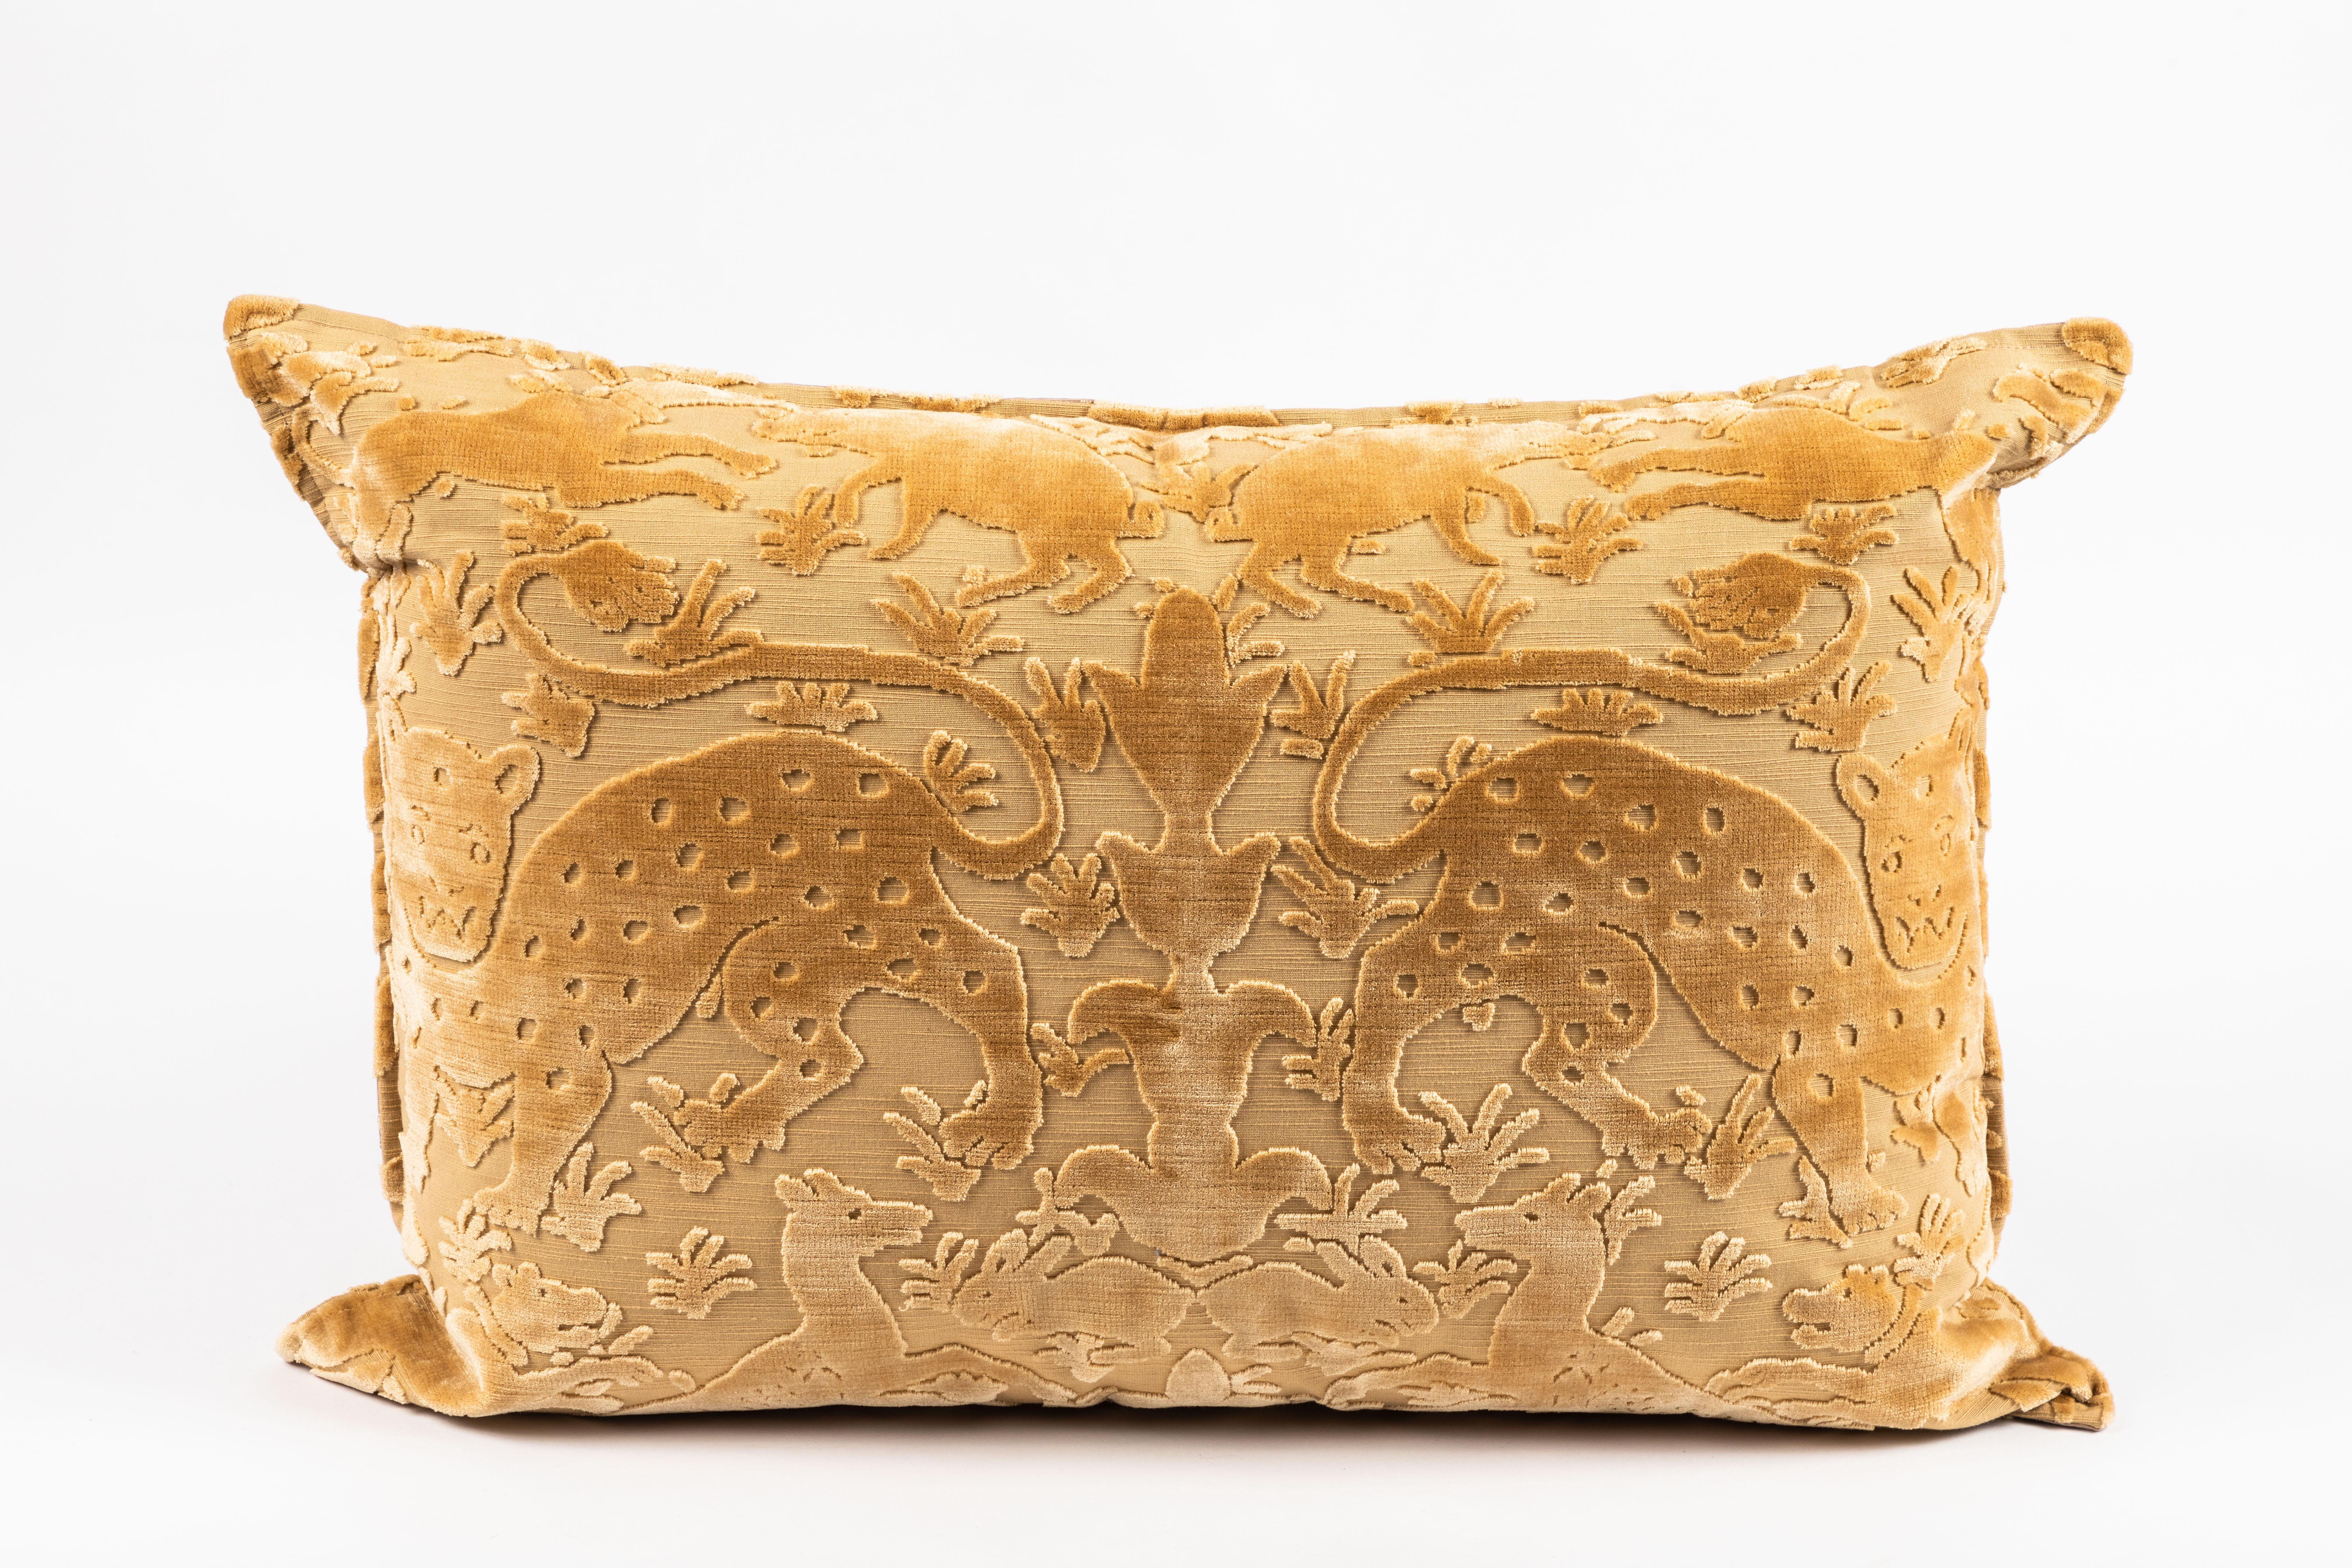 Pillow made from Bevilacqua's Bestiario handcut cotton viscose gold velvet (50/50), featuring an animal motif. 

The roots of the Bevilacqua family in the textile world date back to 1499. The actual Tessitura in Venice was founded by Luigi